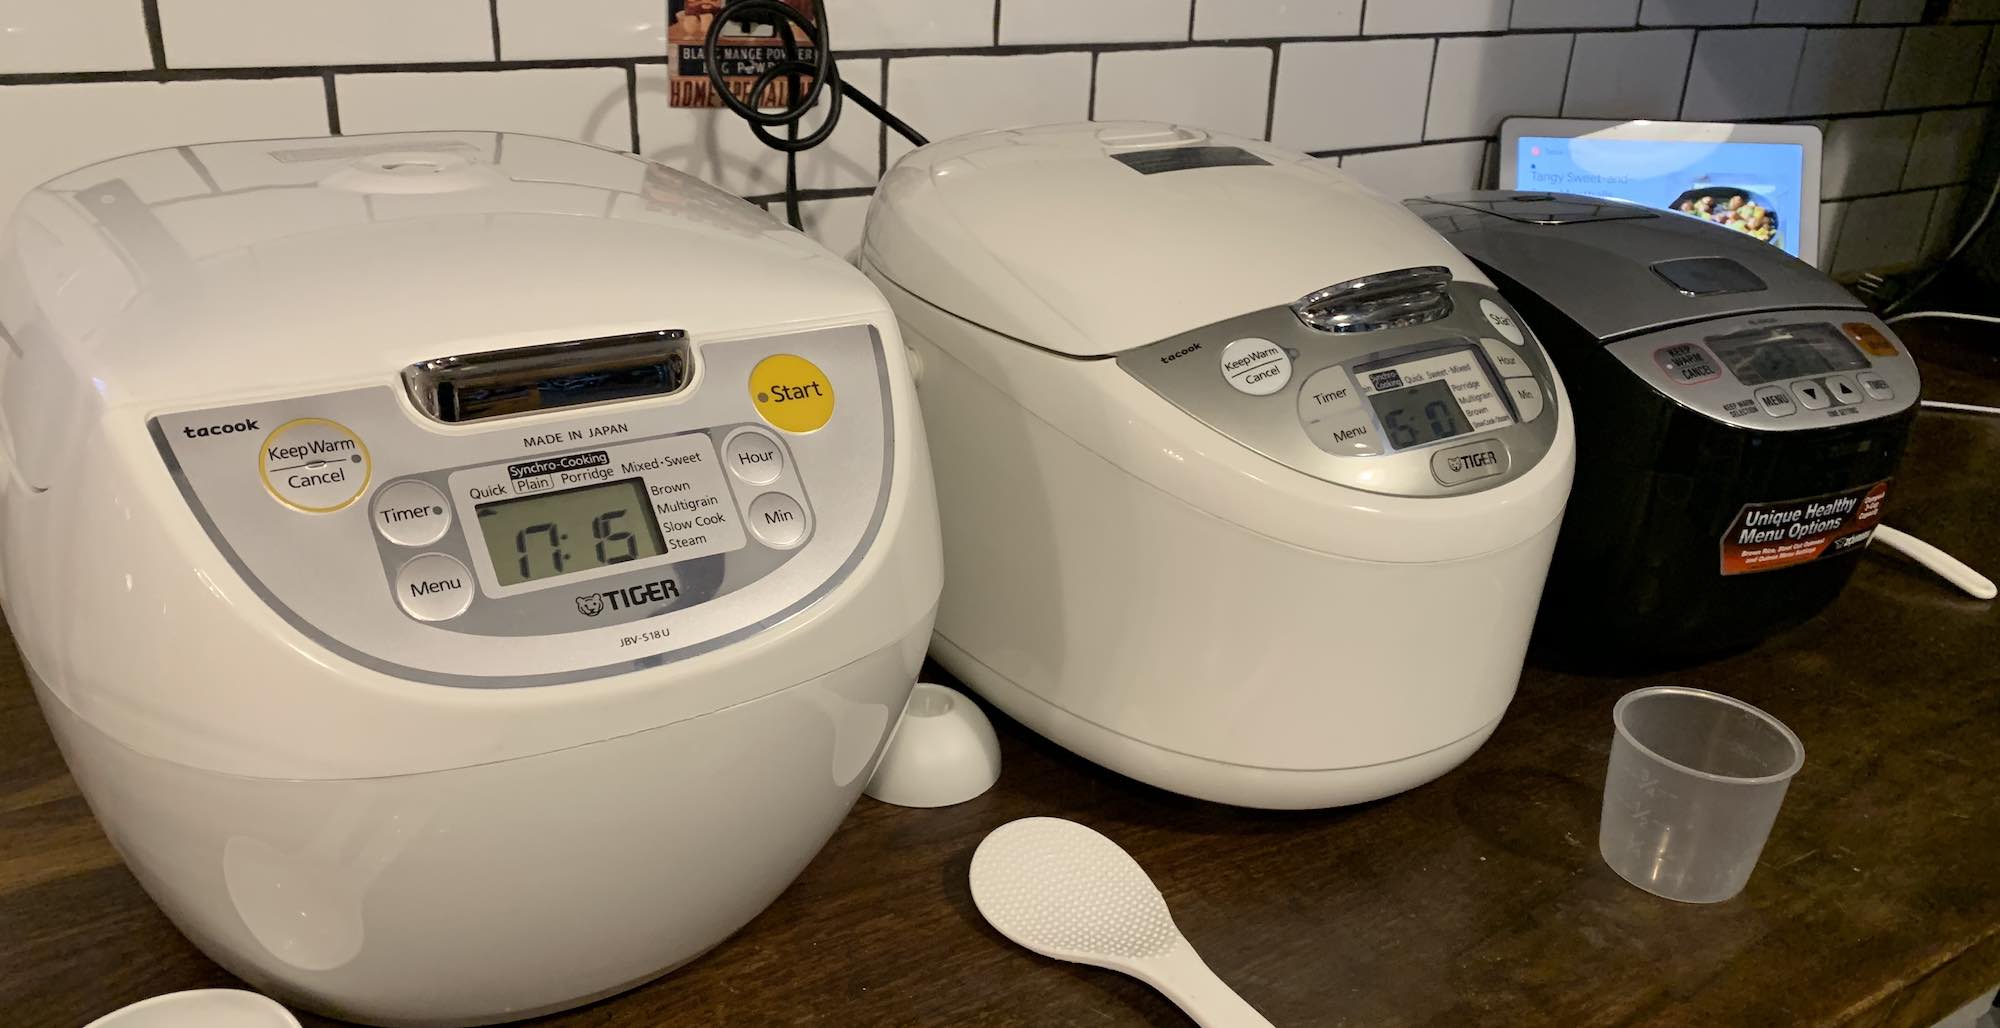 Is Tiger rice cooker made in Japan?